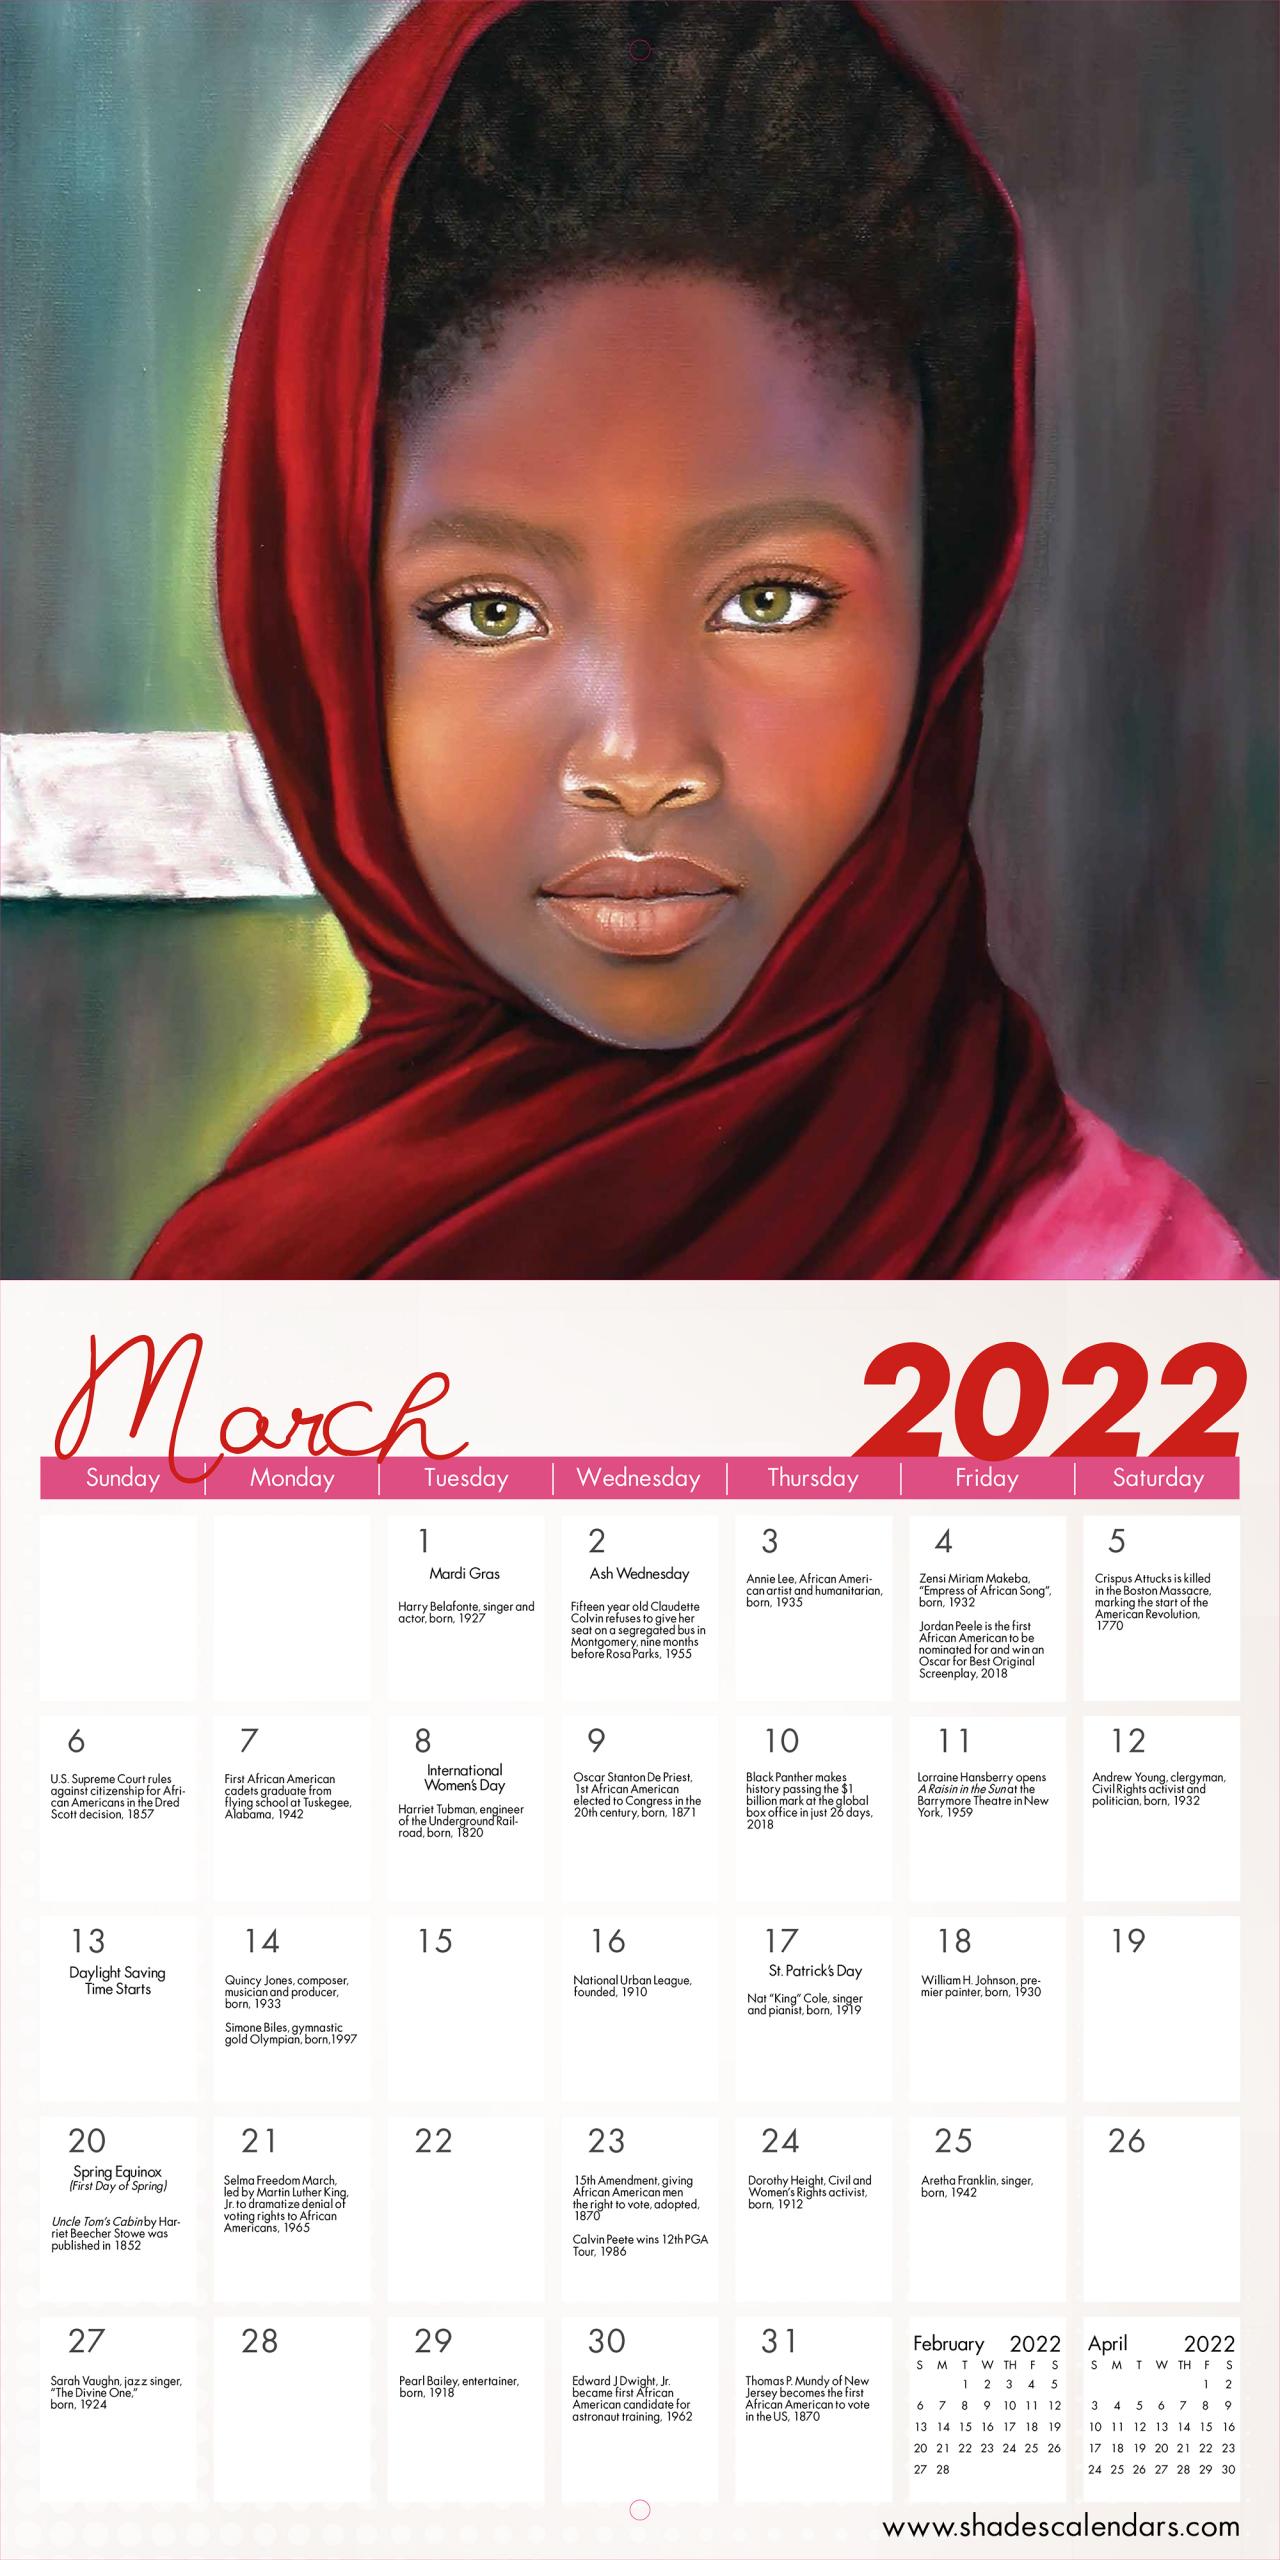 2022 Our Children, Our Hope Wall Calendar by Dora Alis